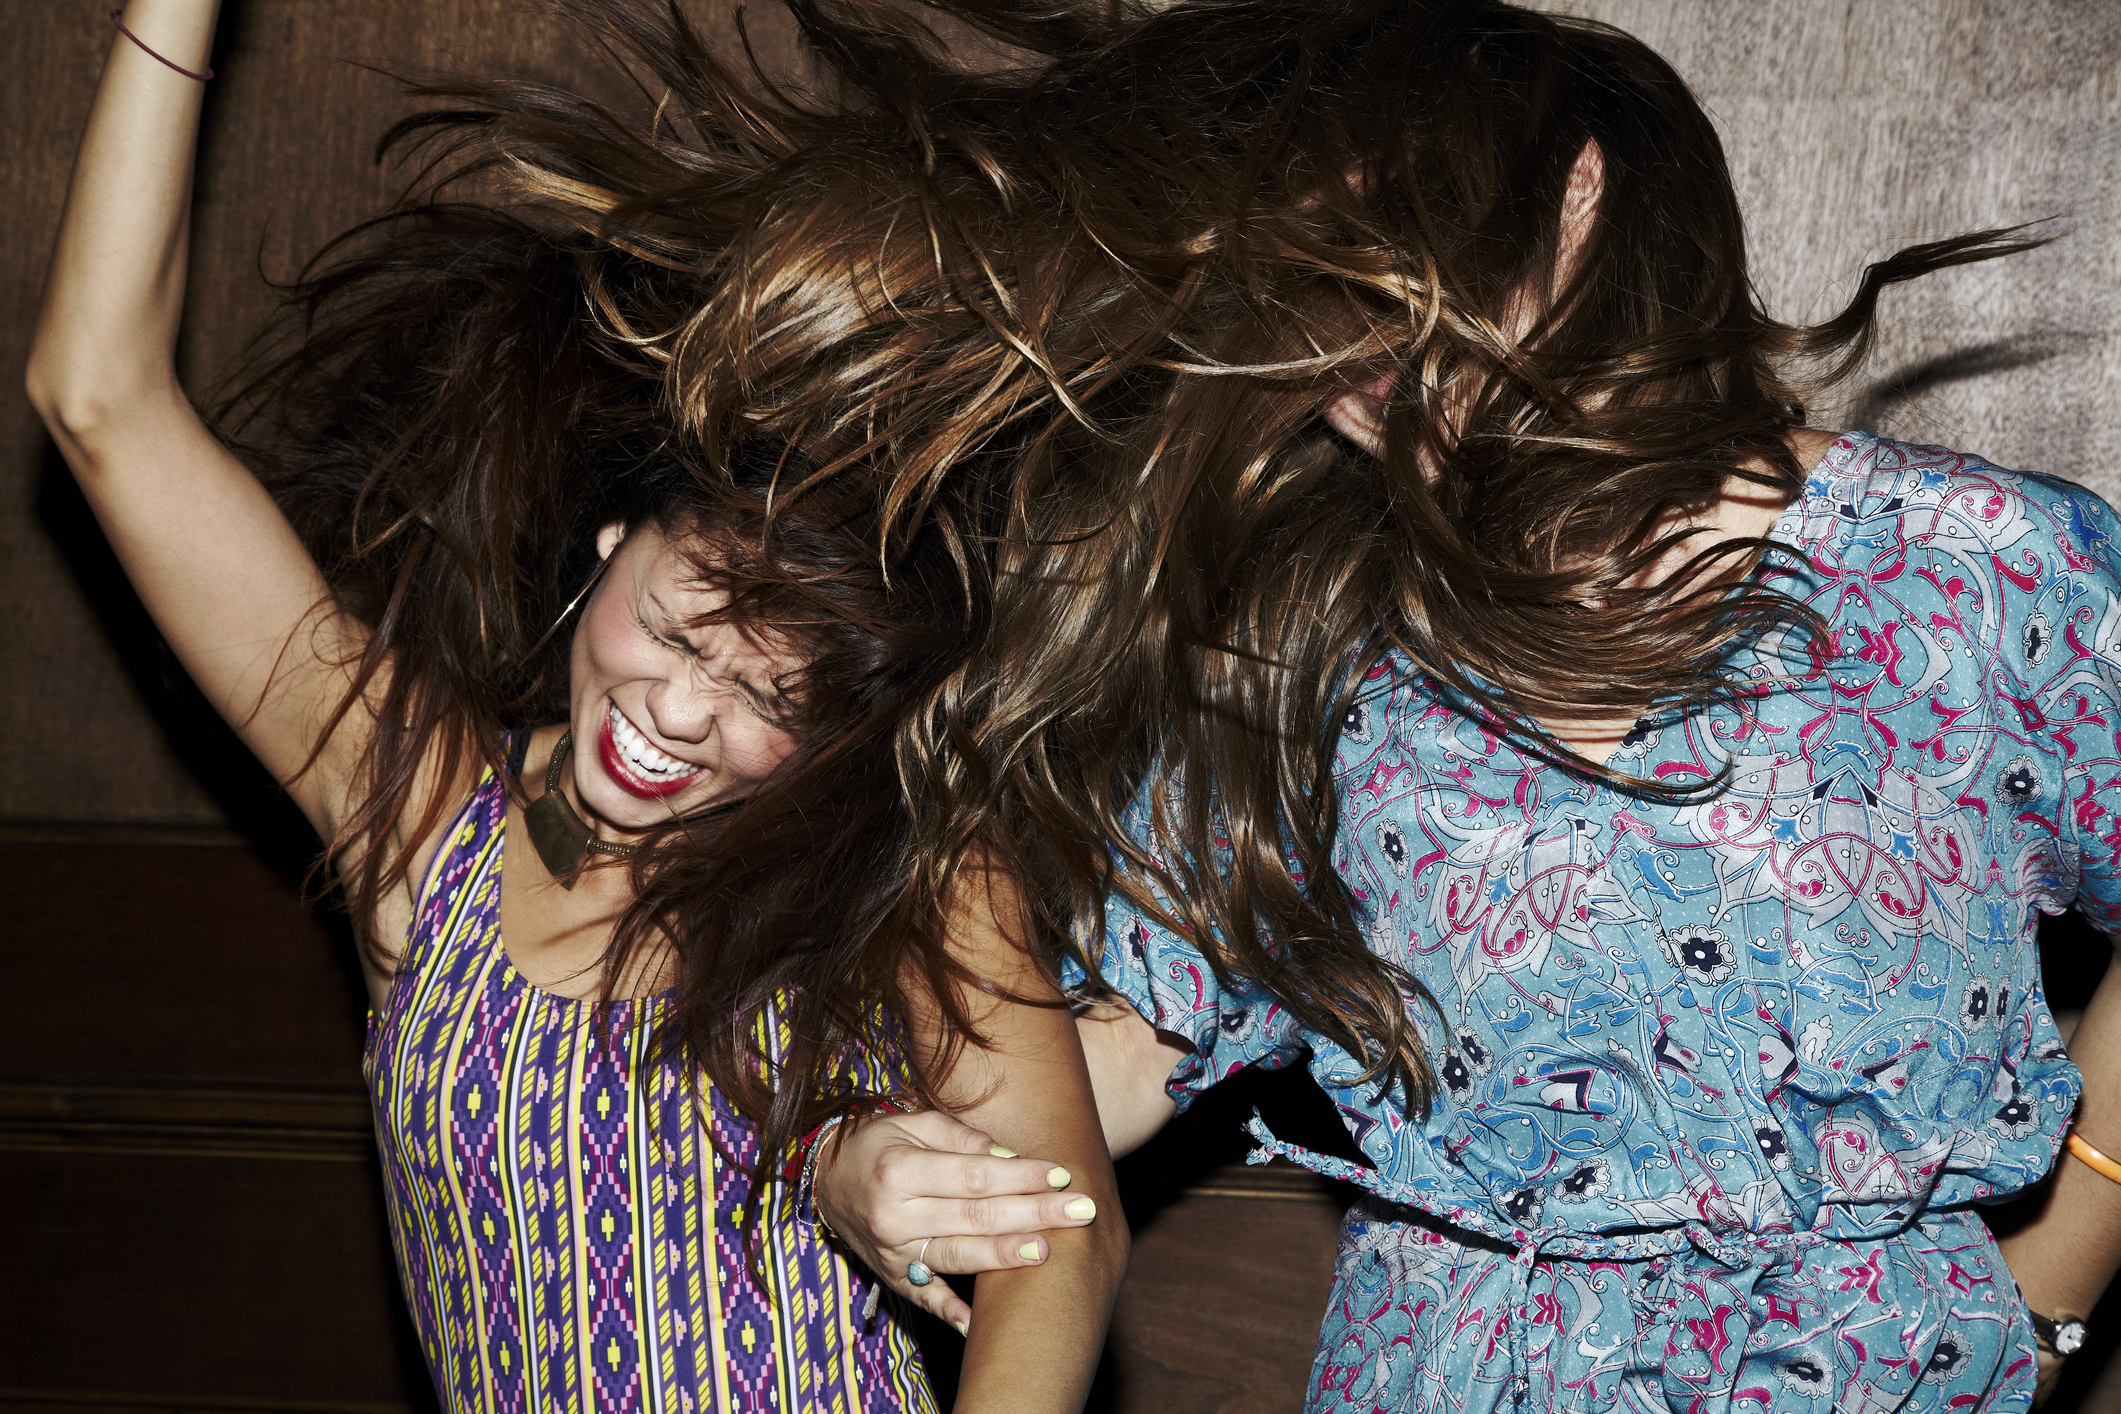 Two people in patterned dresses laughing with hair flipping in the air